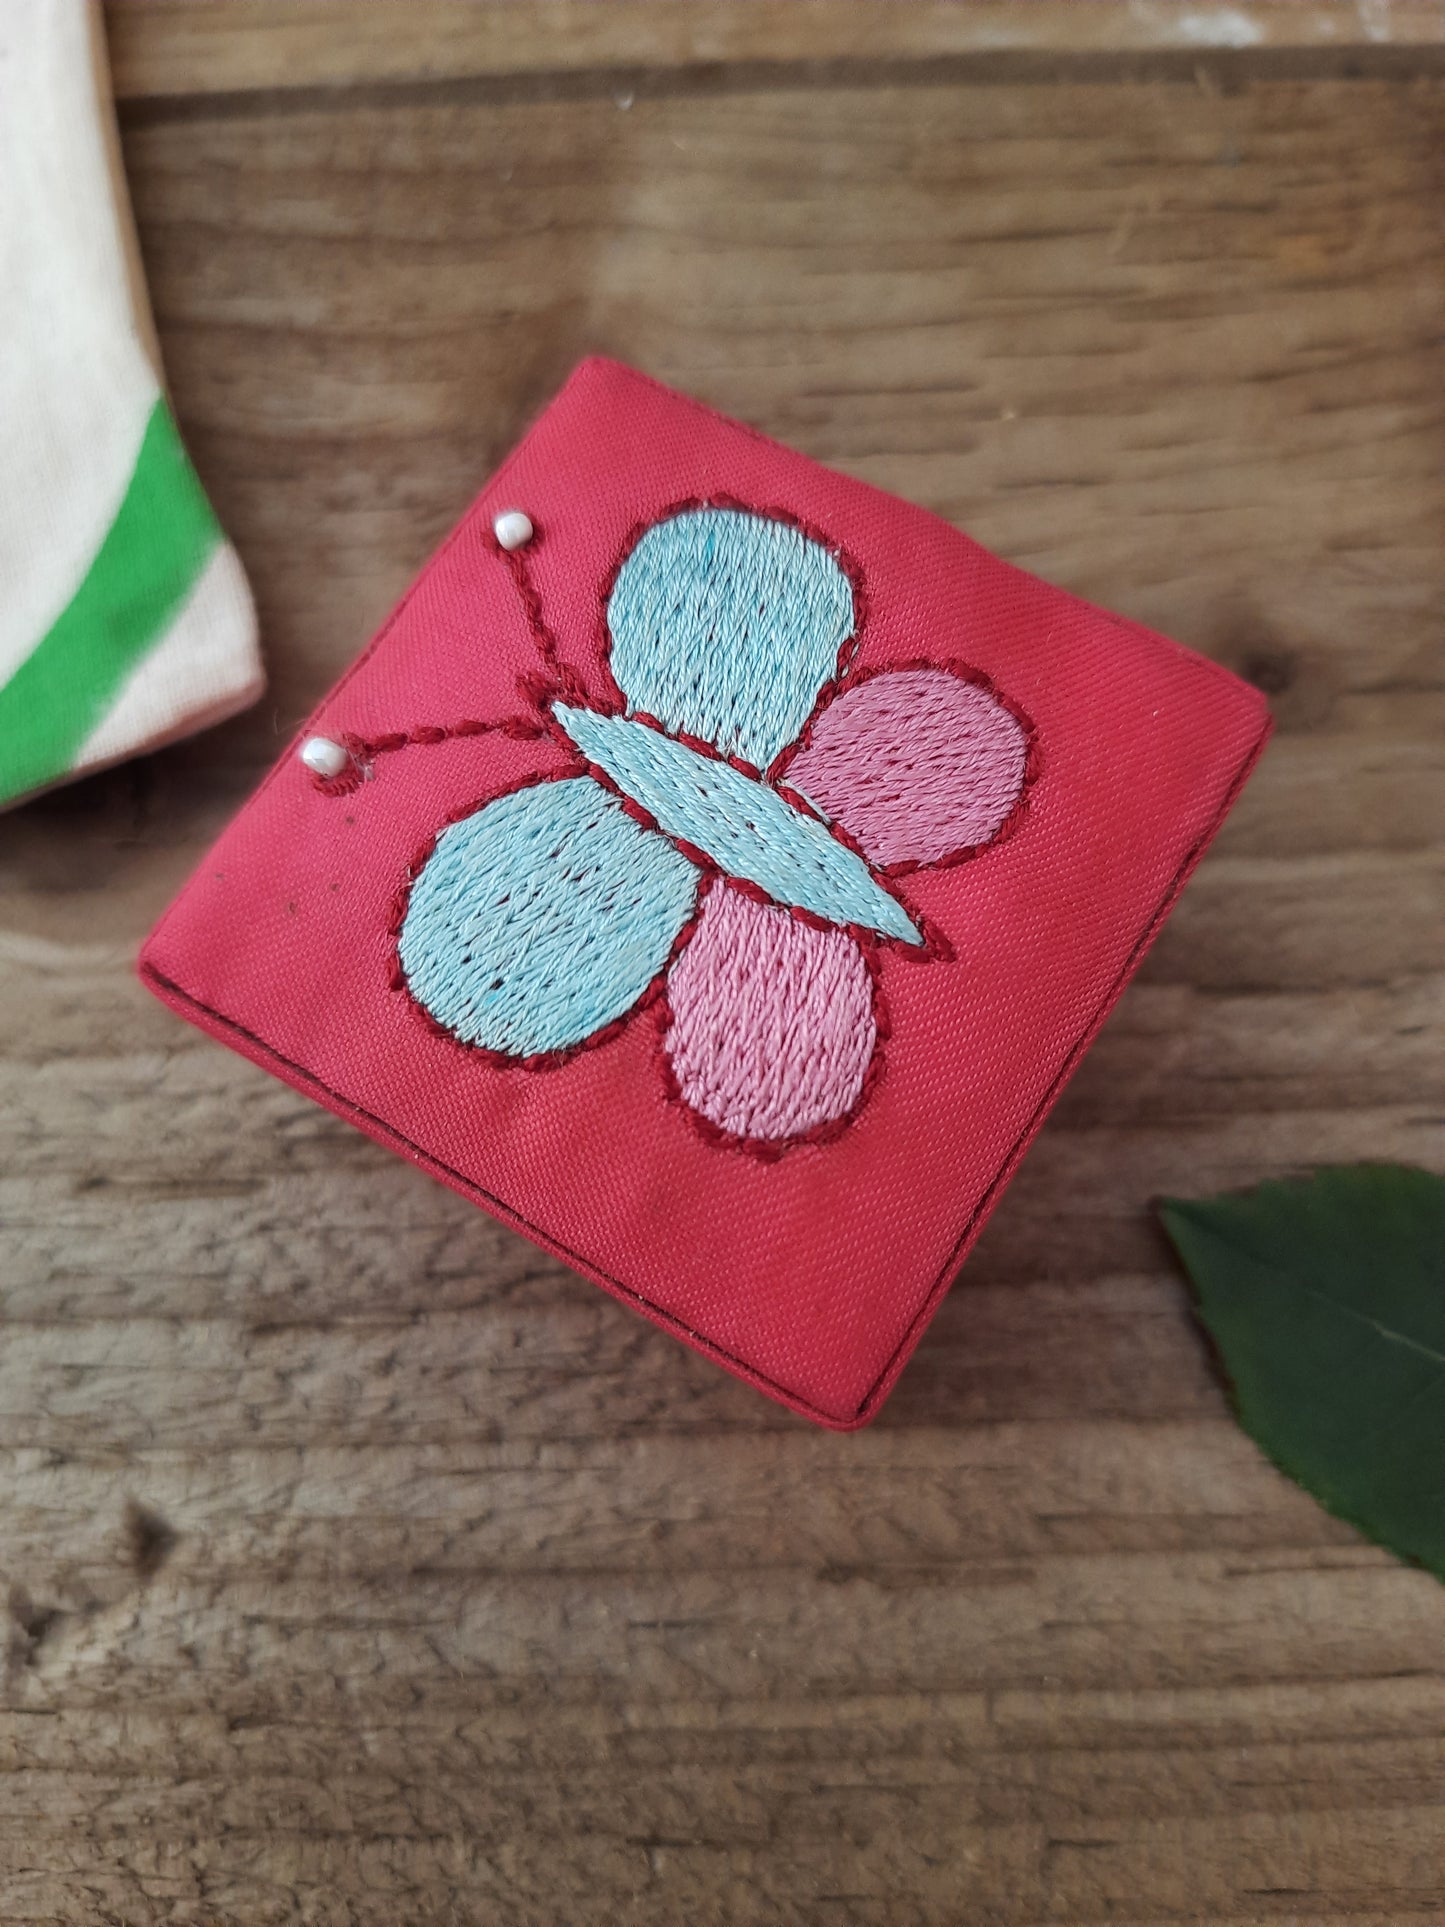 Shop Ethical | Jewellery Box | Small Butterfly | Fair Trade Products | Small Jewelry Box